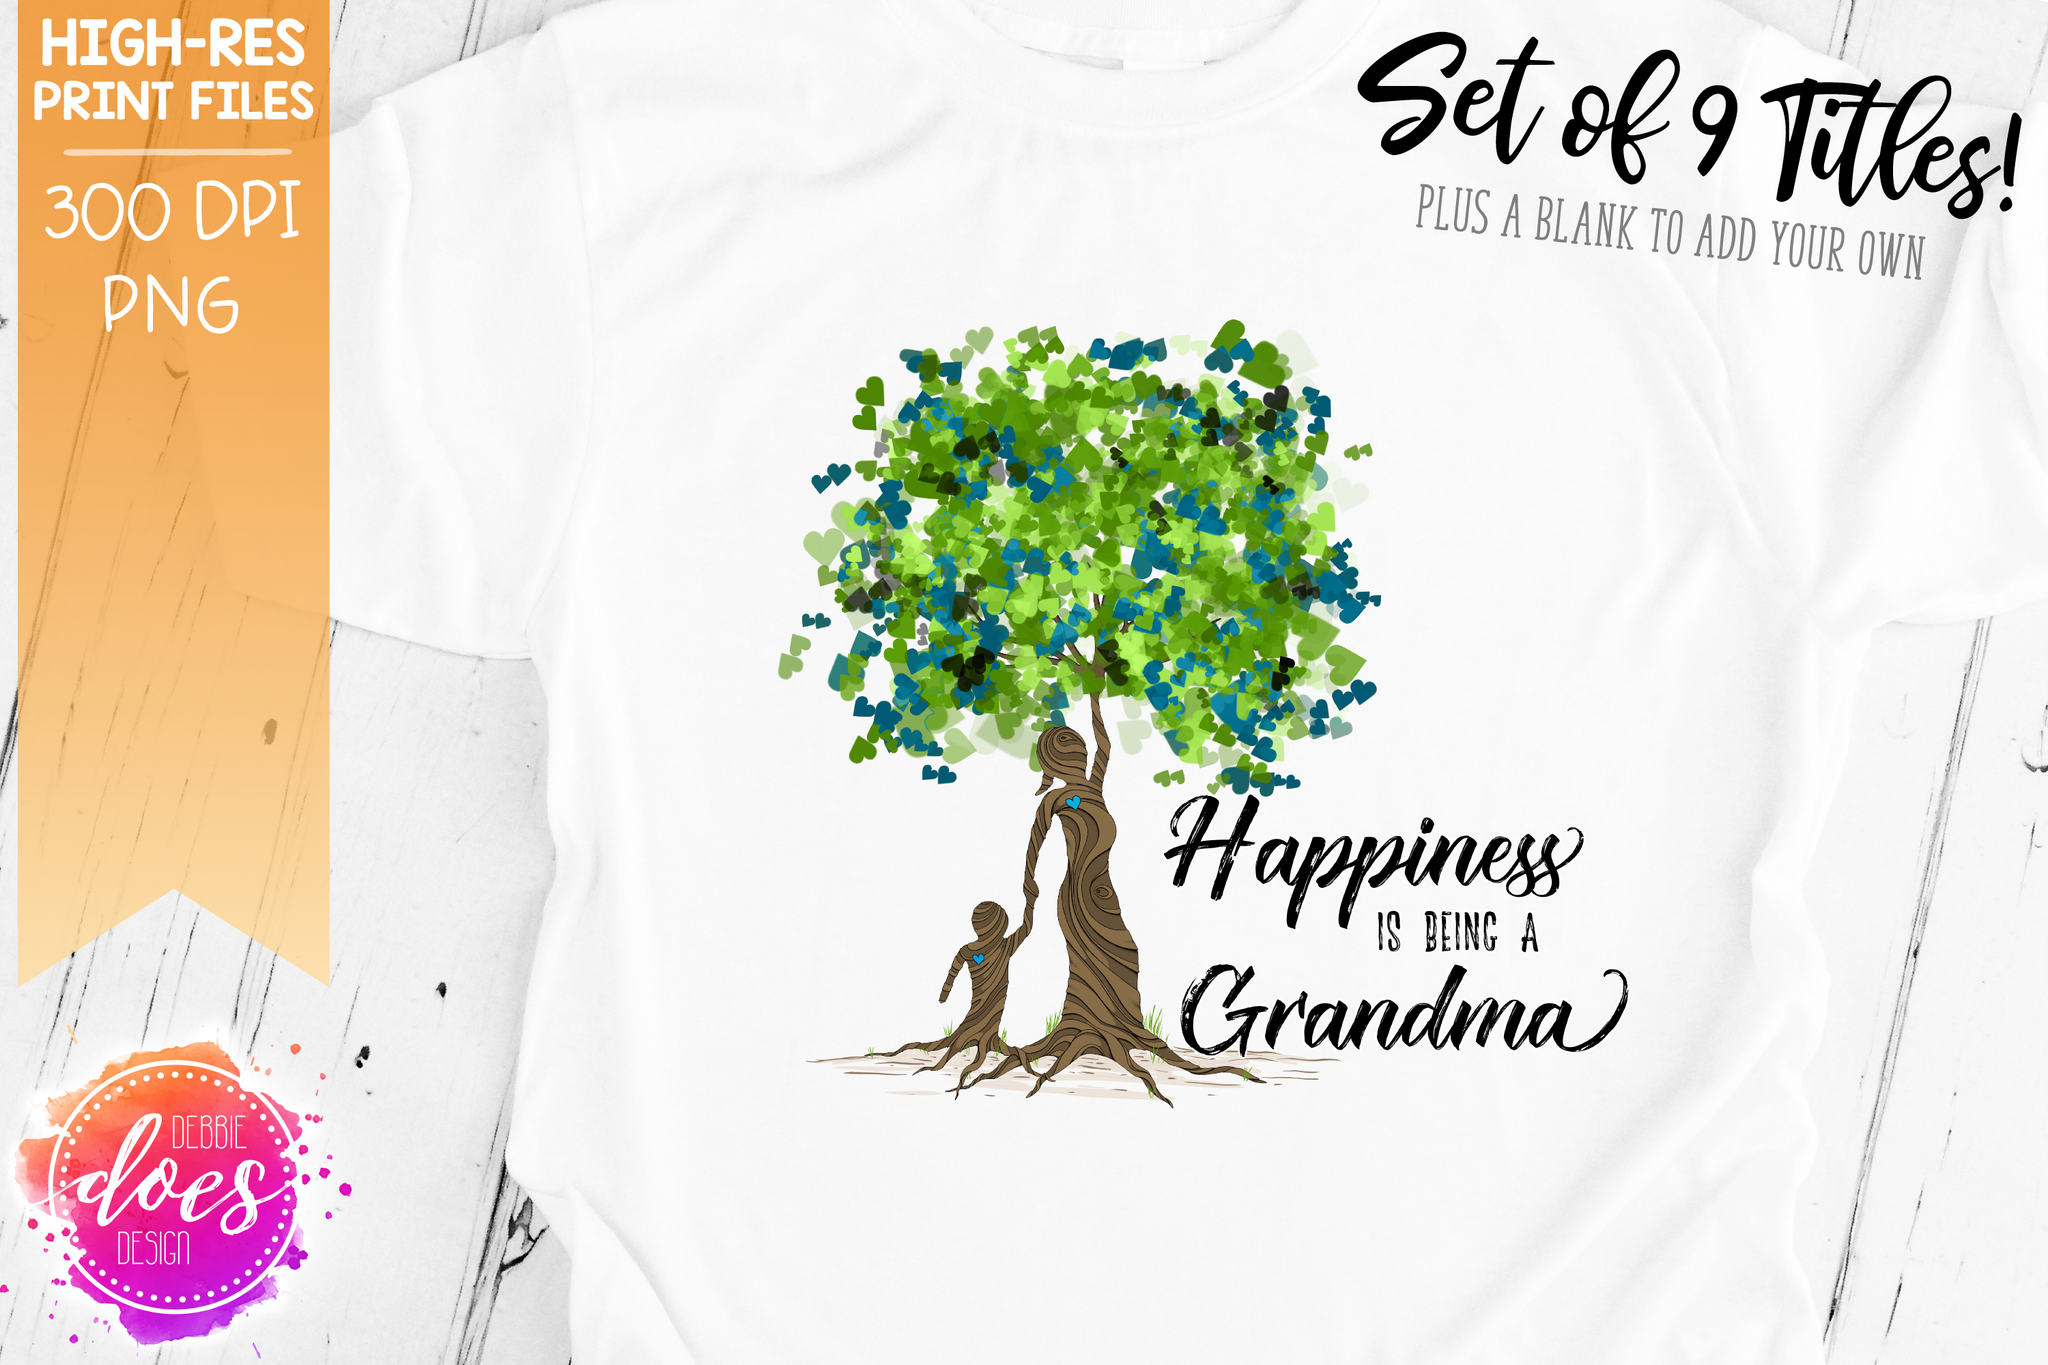 Download Happiness Is Being A Grandma Boy Tree 9 Versions Sublimation Pr Debbie Does Design